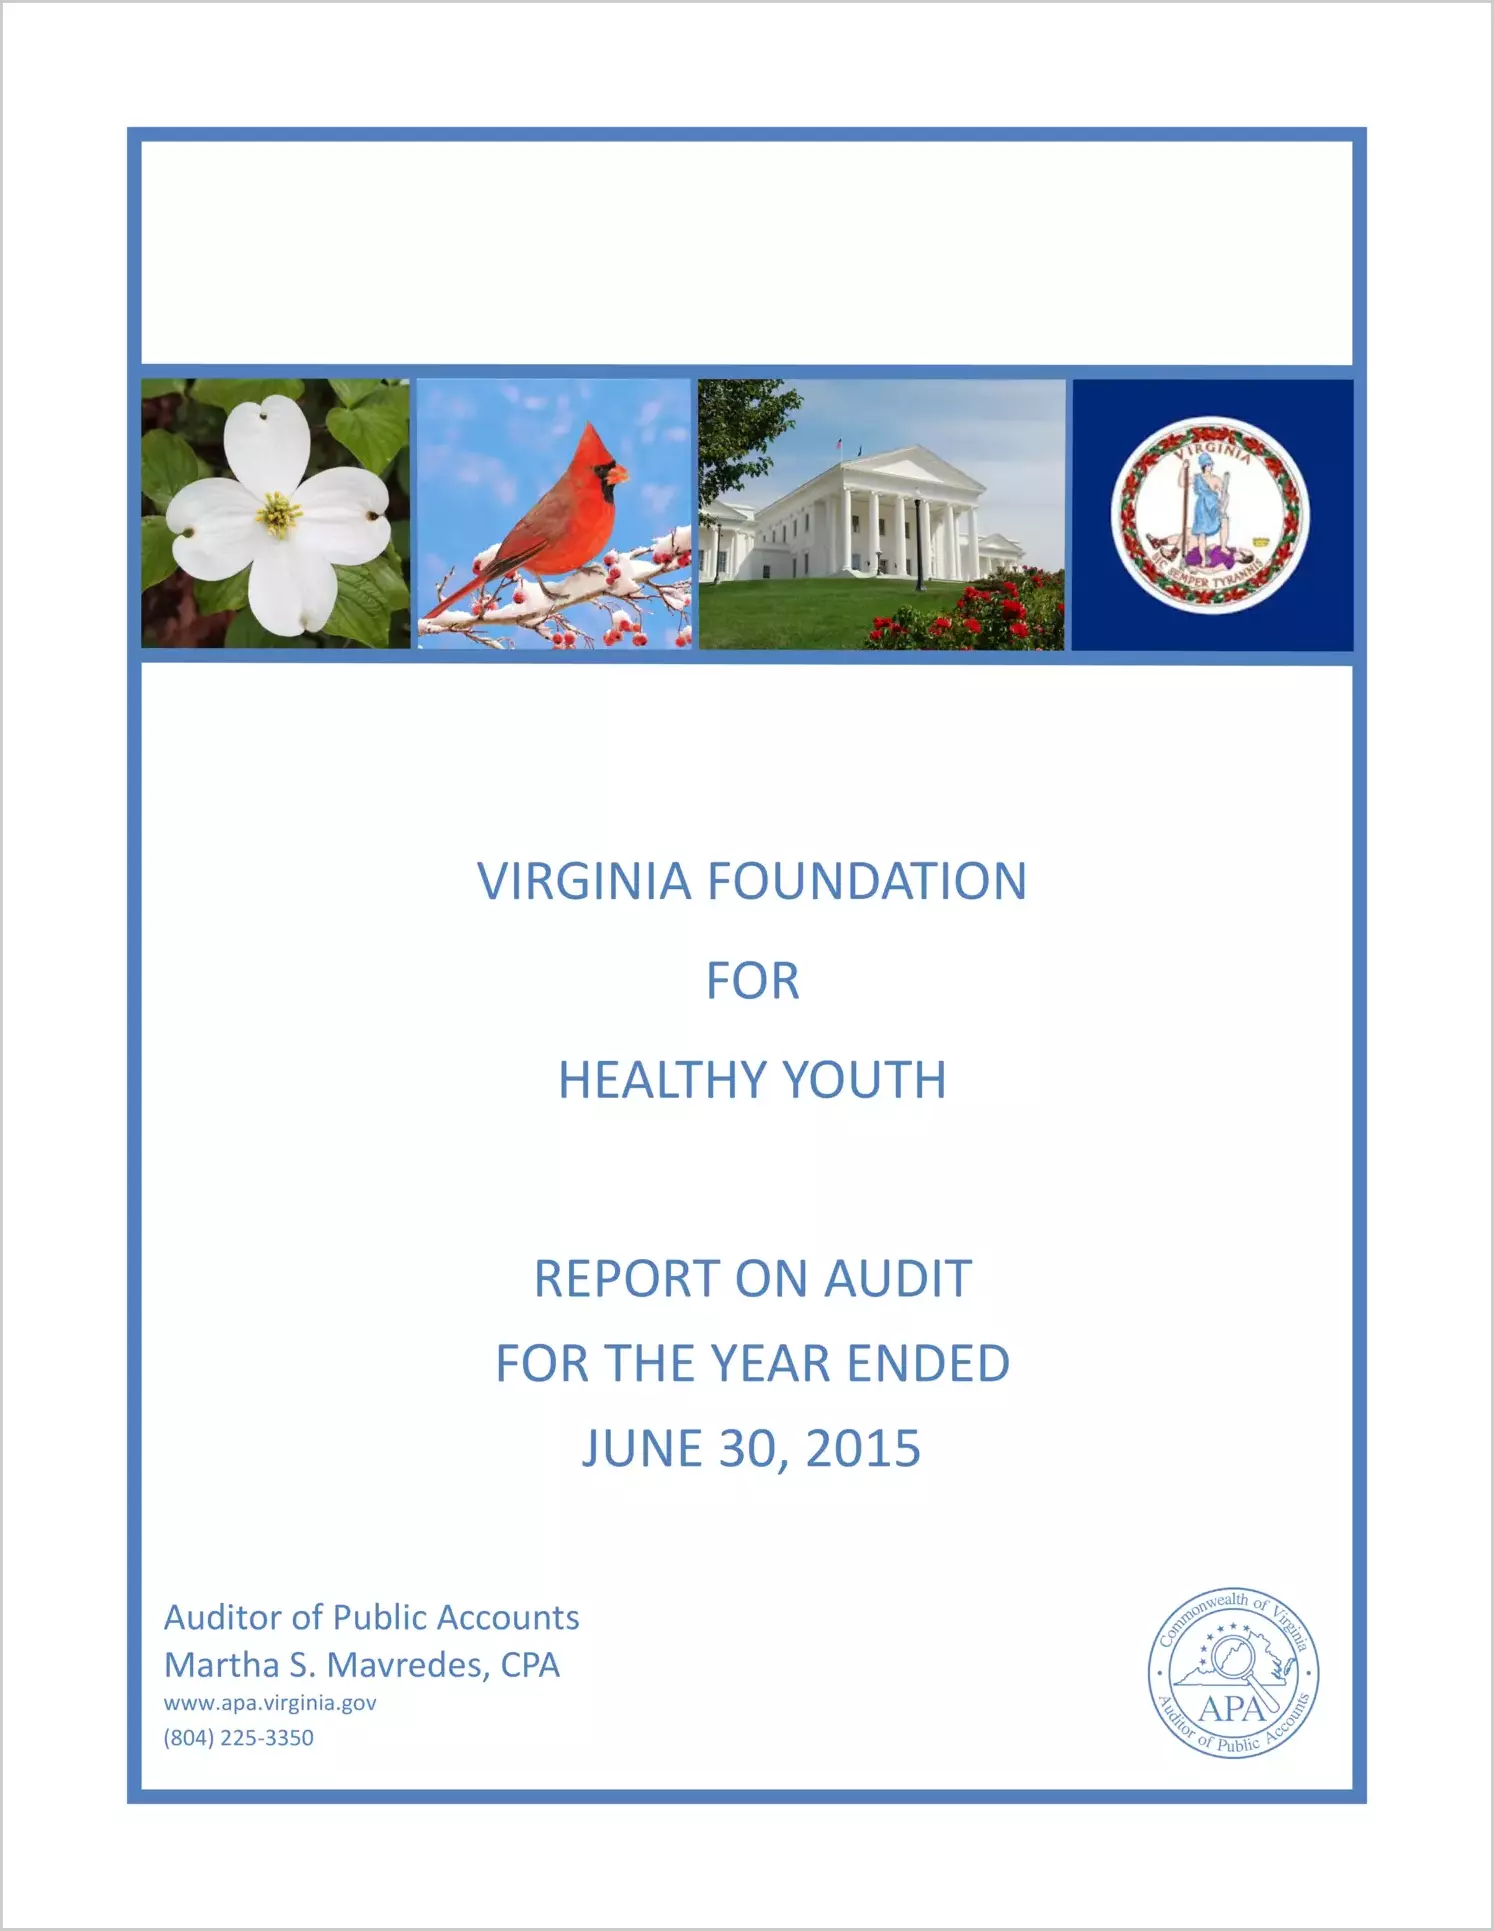 Foundation for Healthy Youth for the year ended June 30, 2015